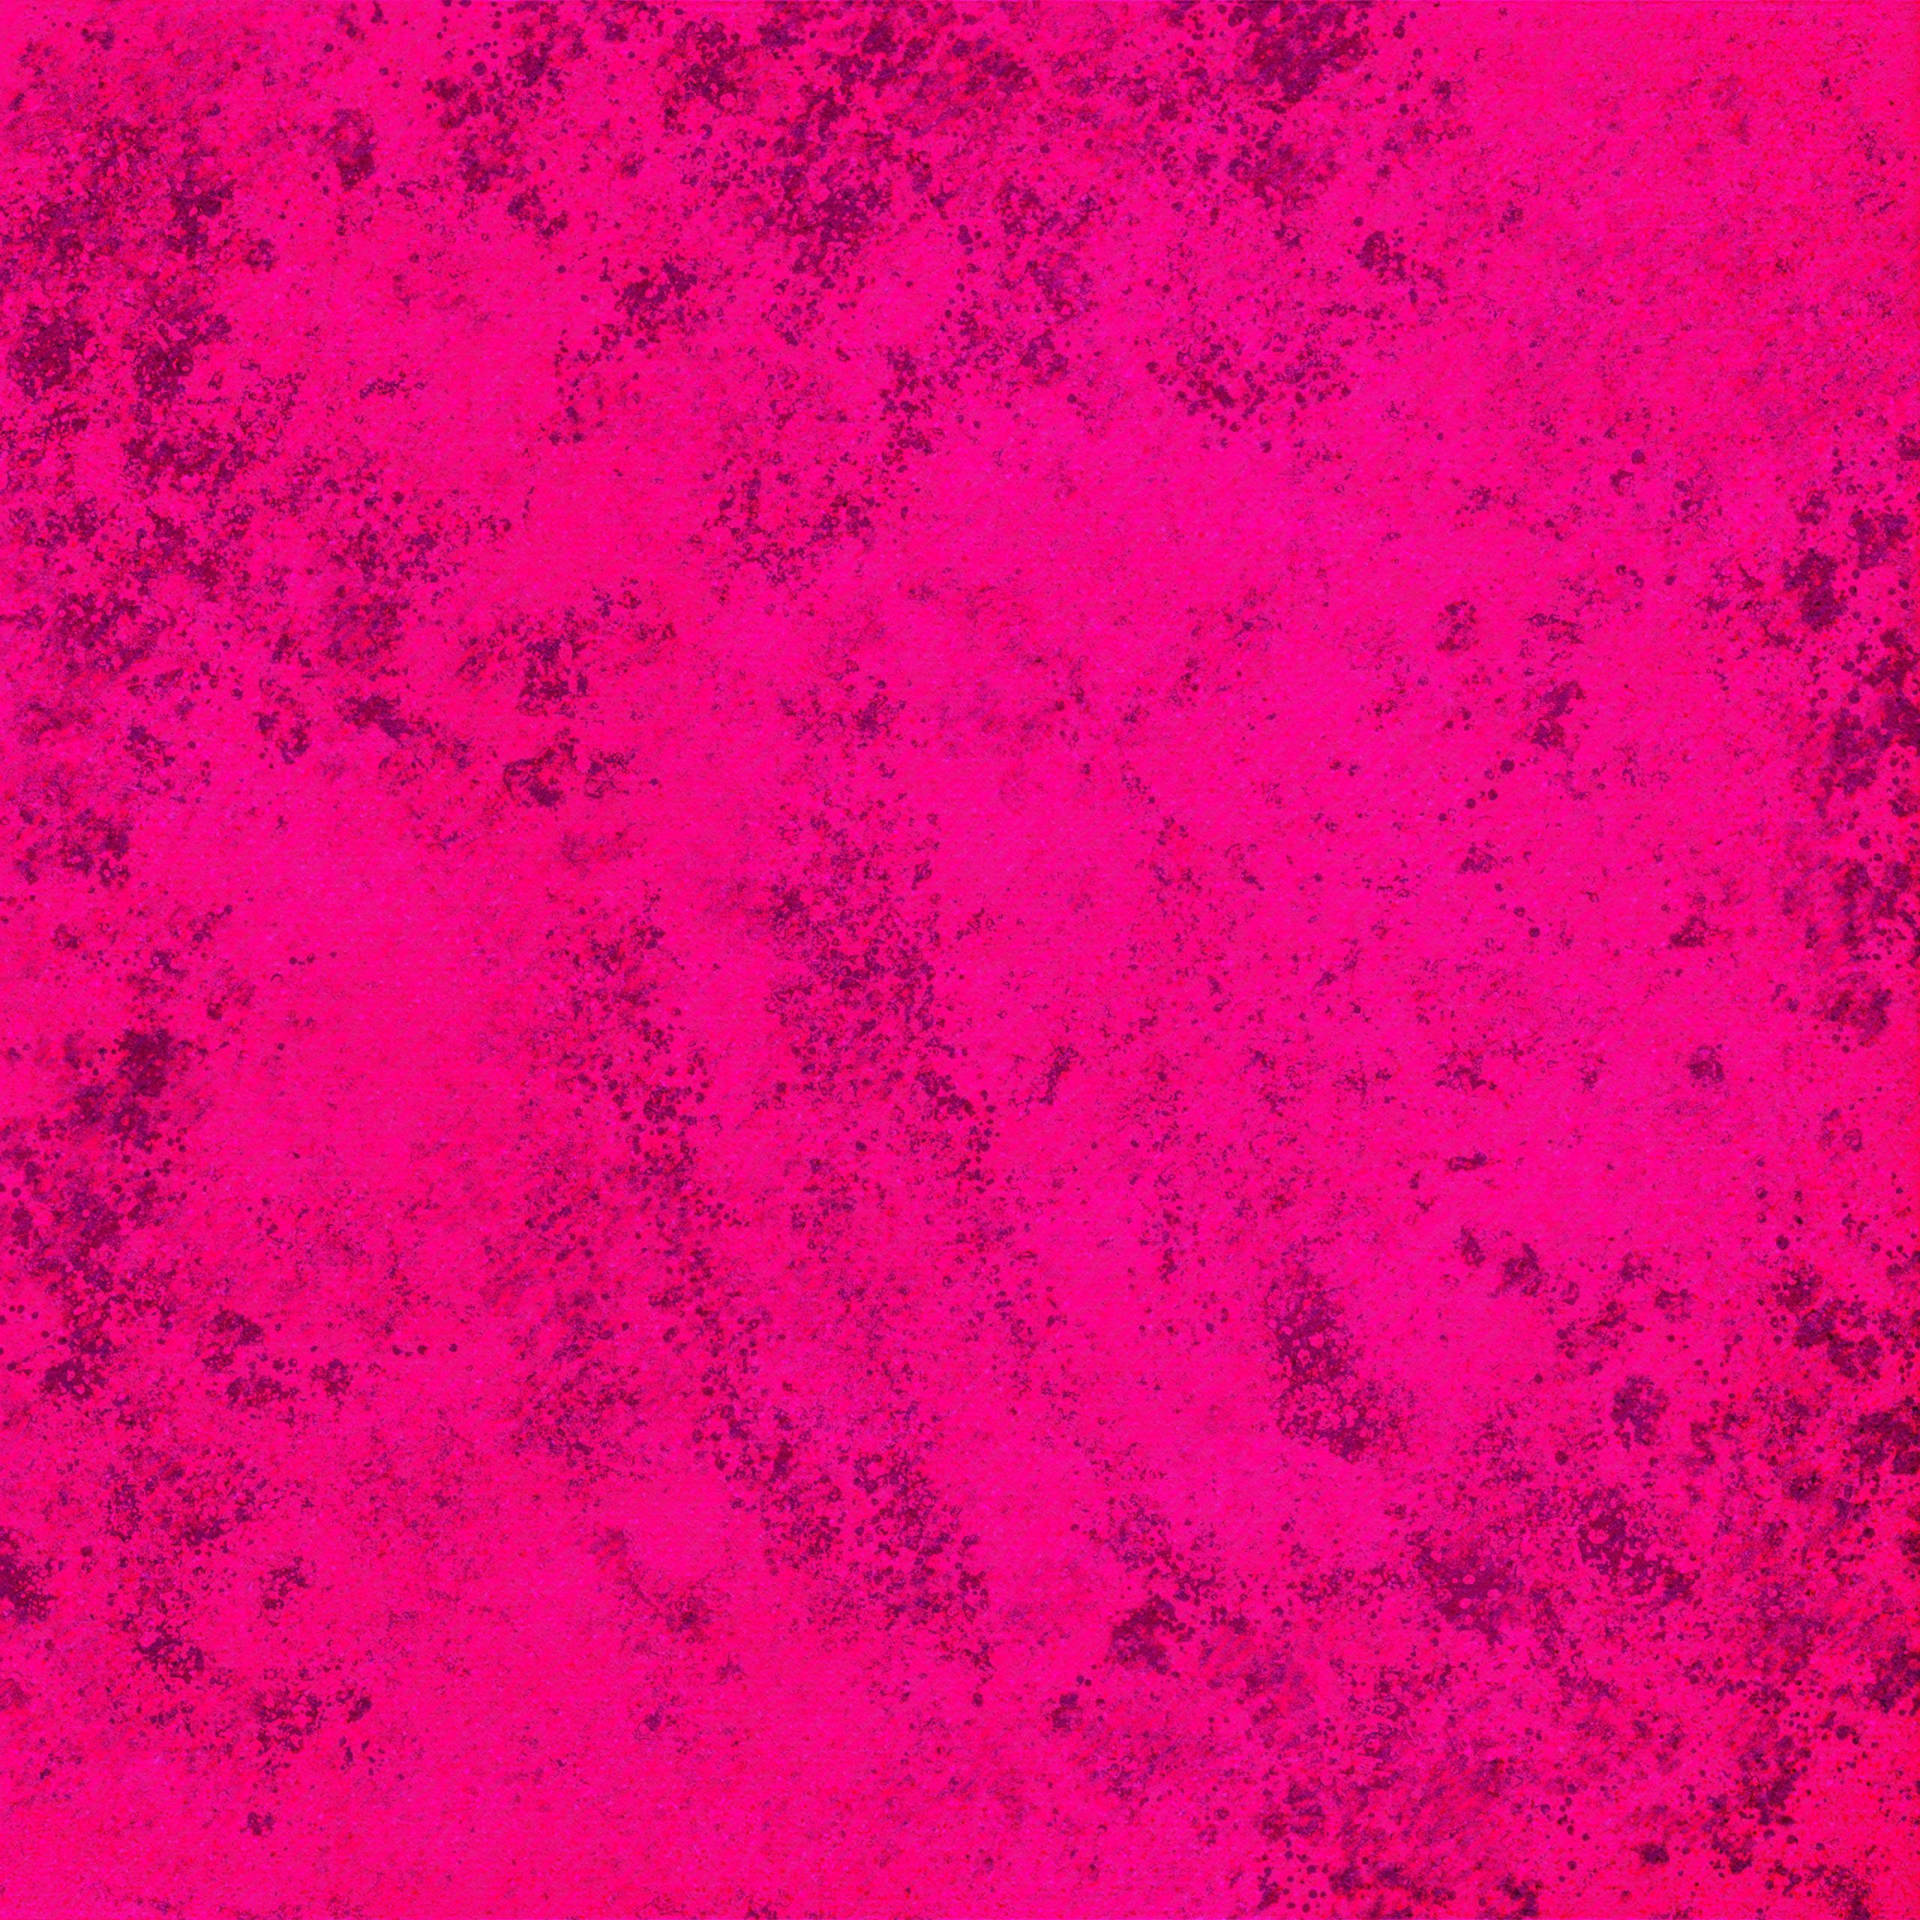 Textured Hot Pink Aesthetic Picture